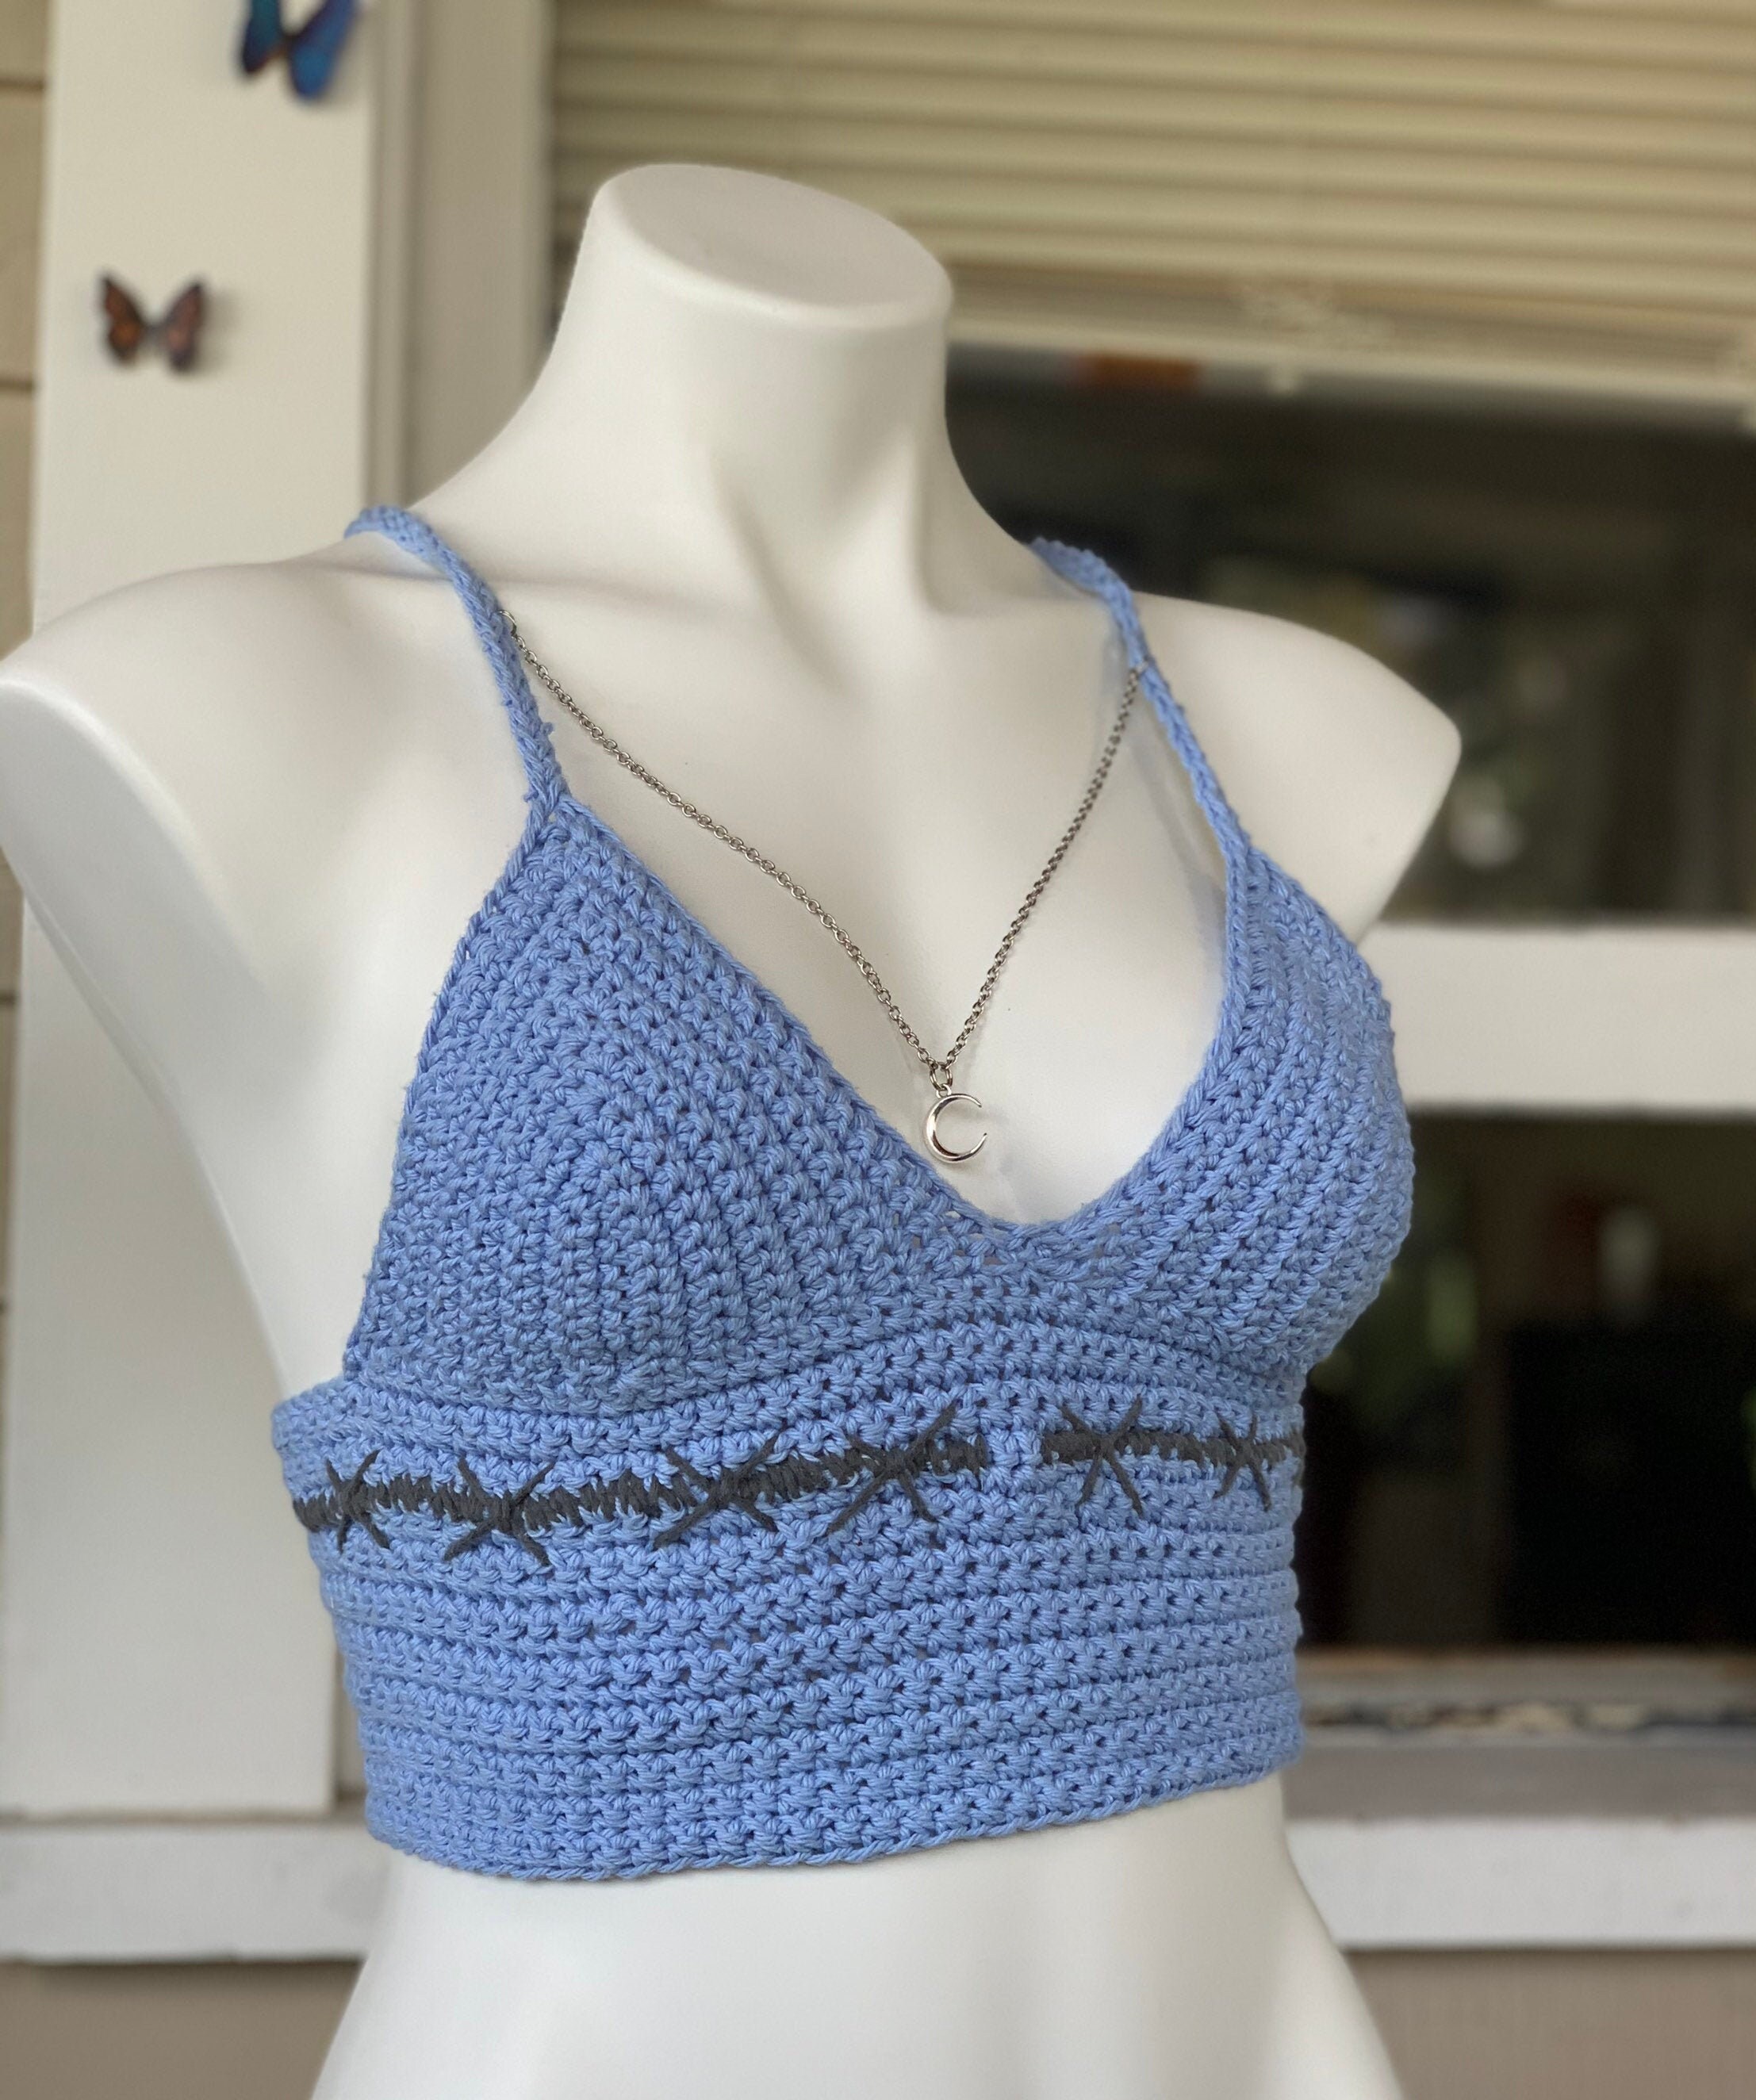 Barbed wire crochet top | Etsy